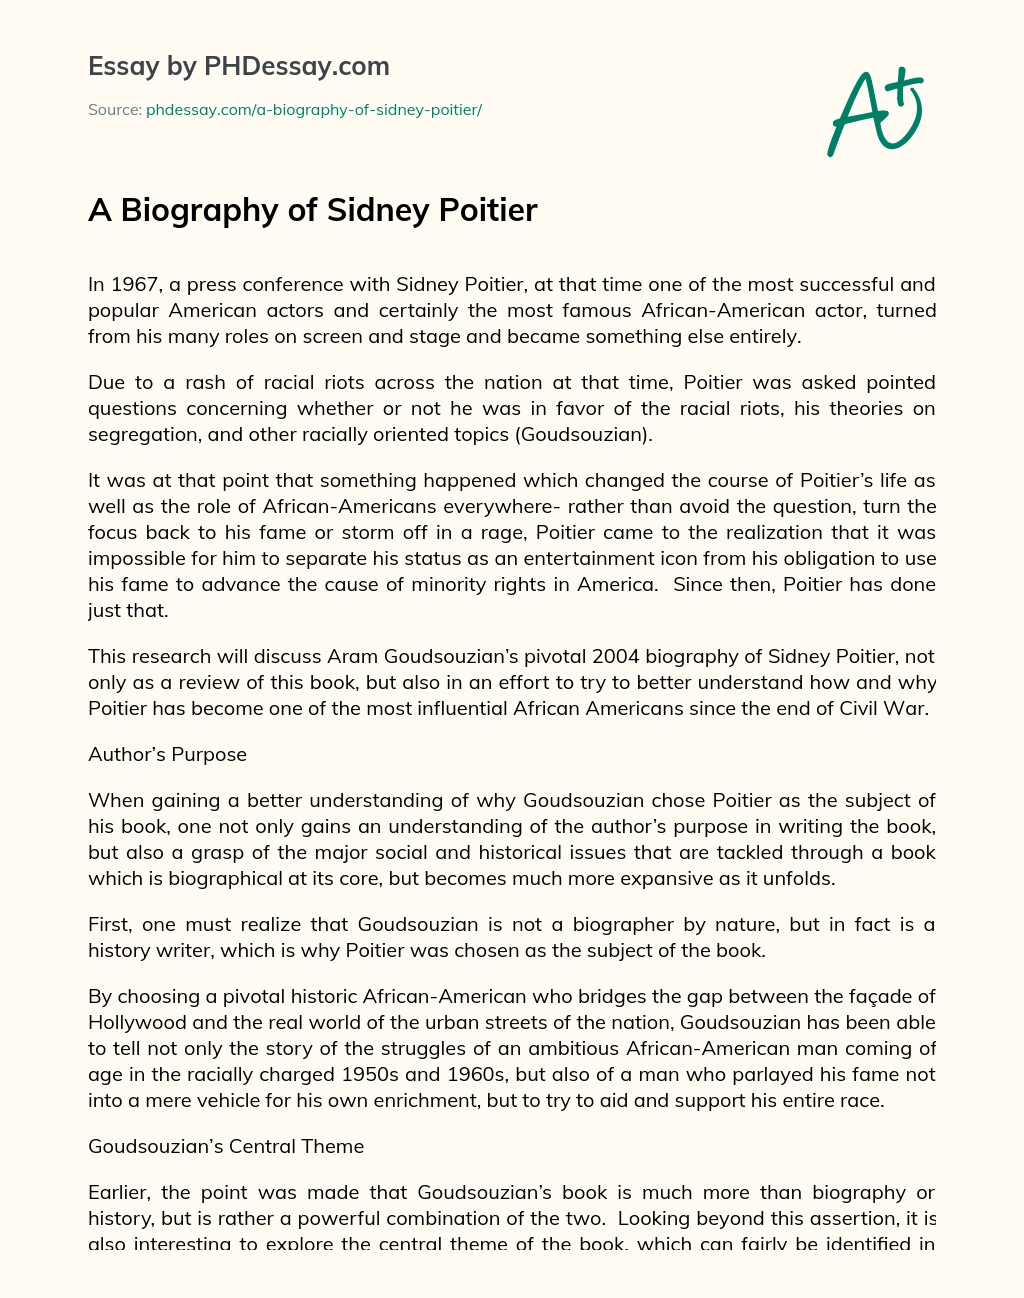 A Biography of Sidney Poitier essay